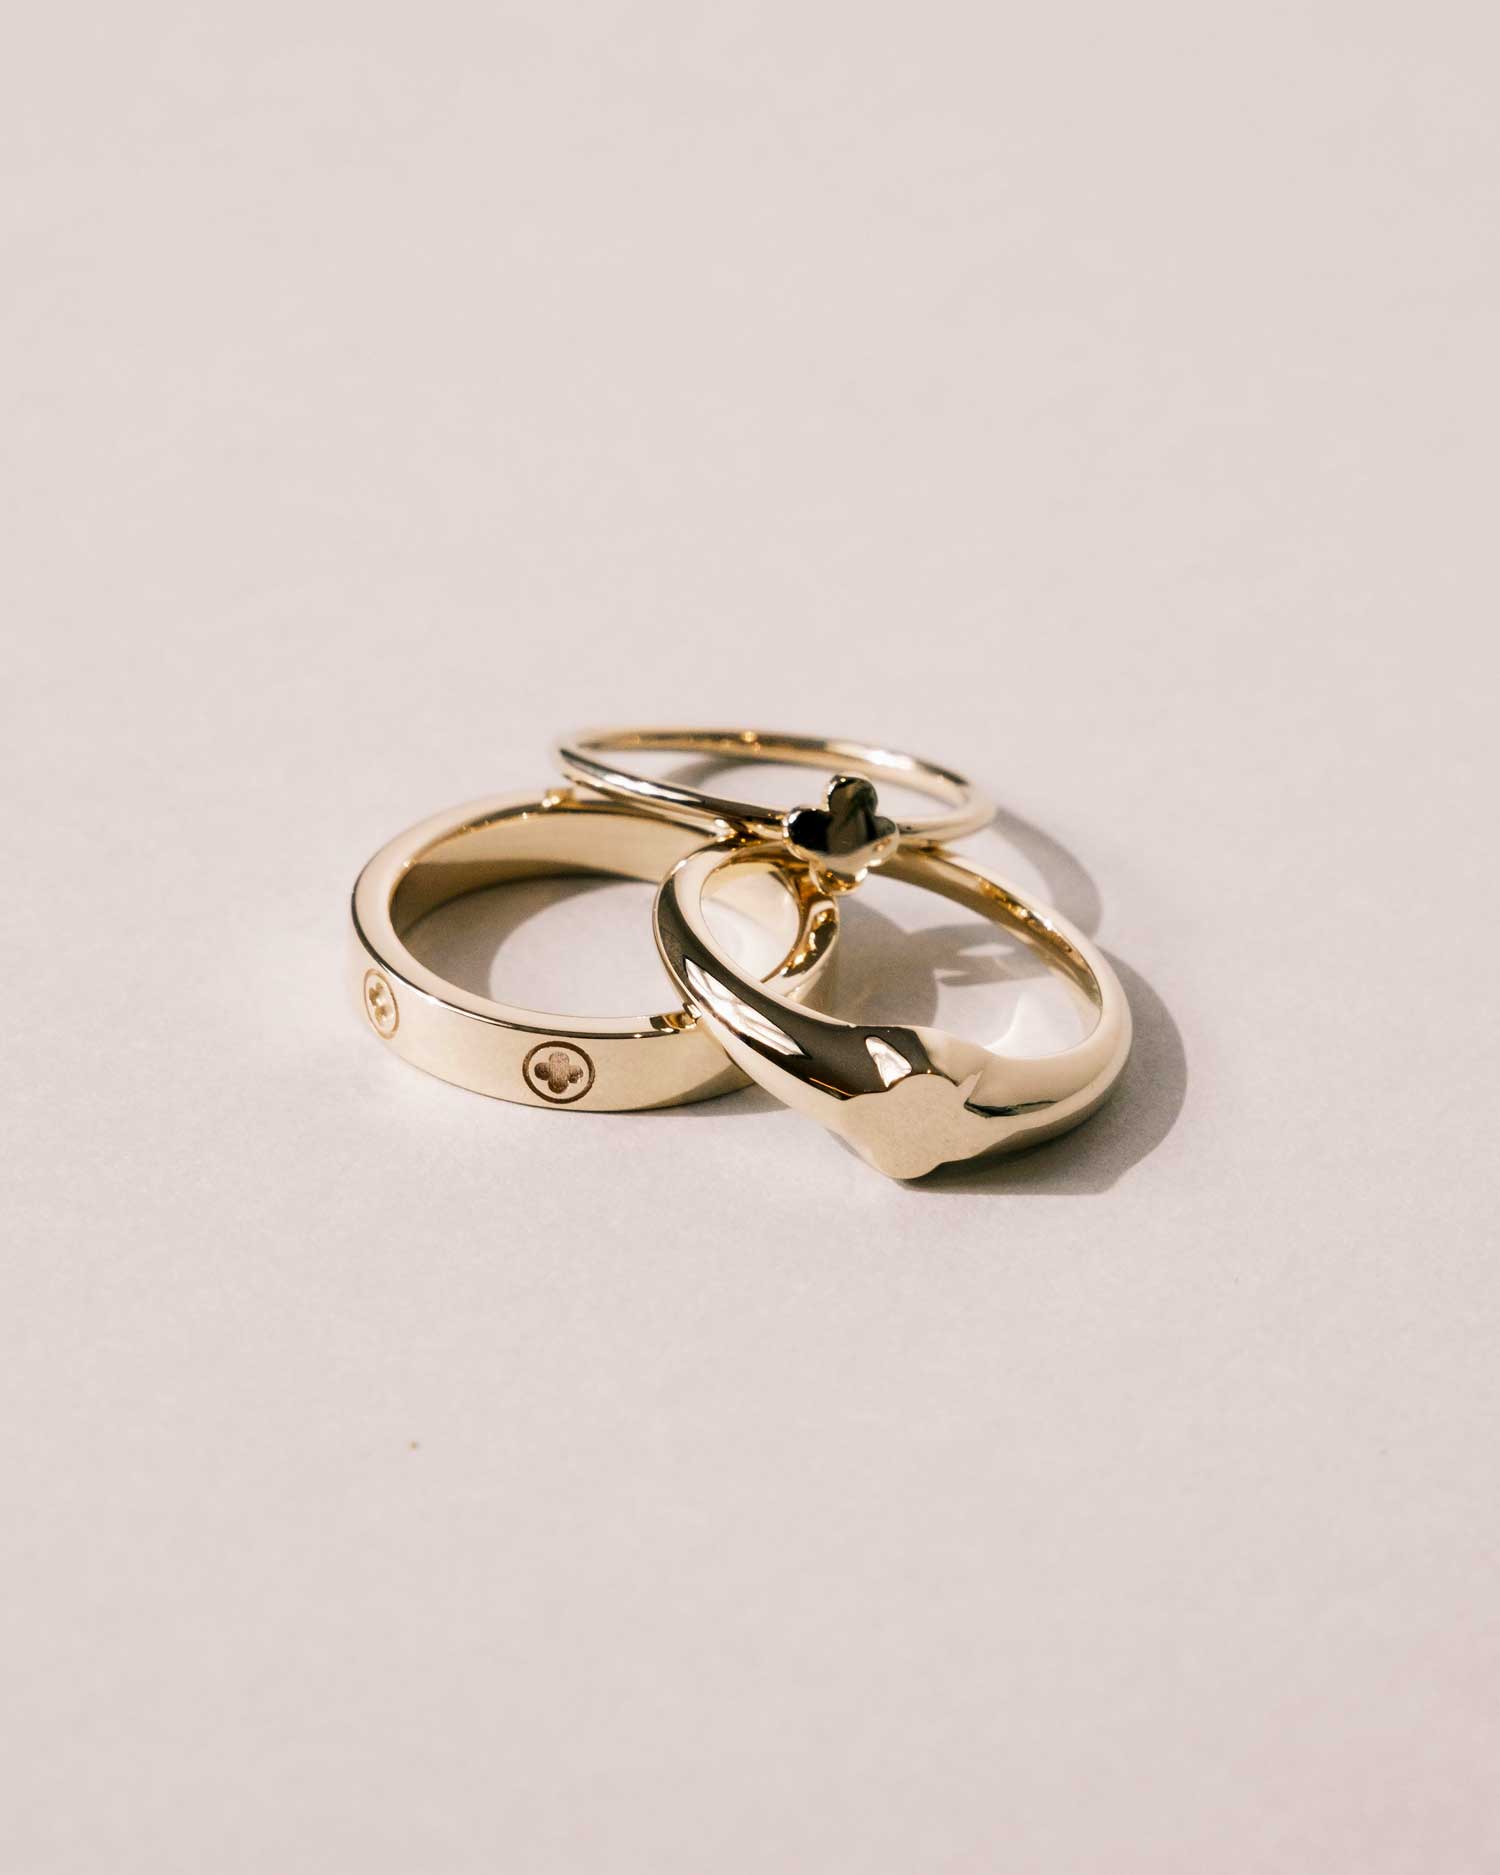 trèfle collection of rings from claude and me jewellery stack on a white surface